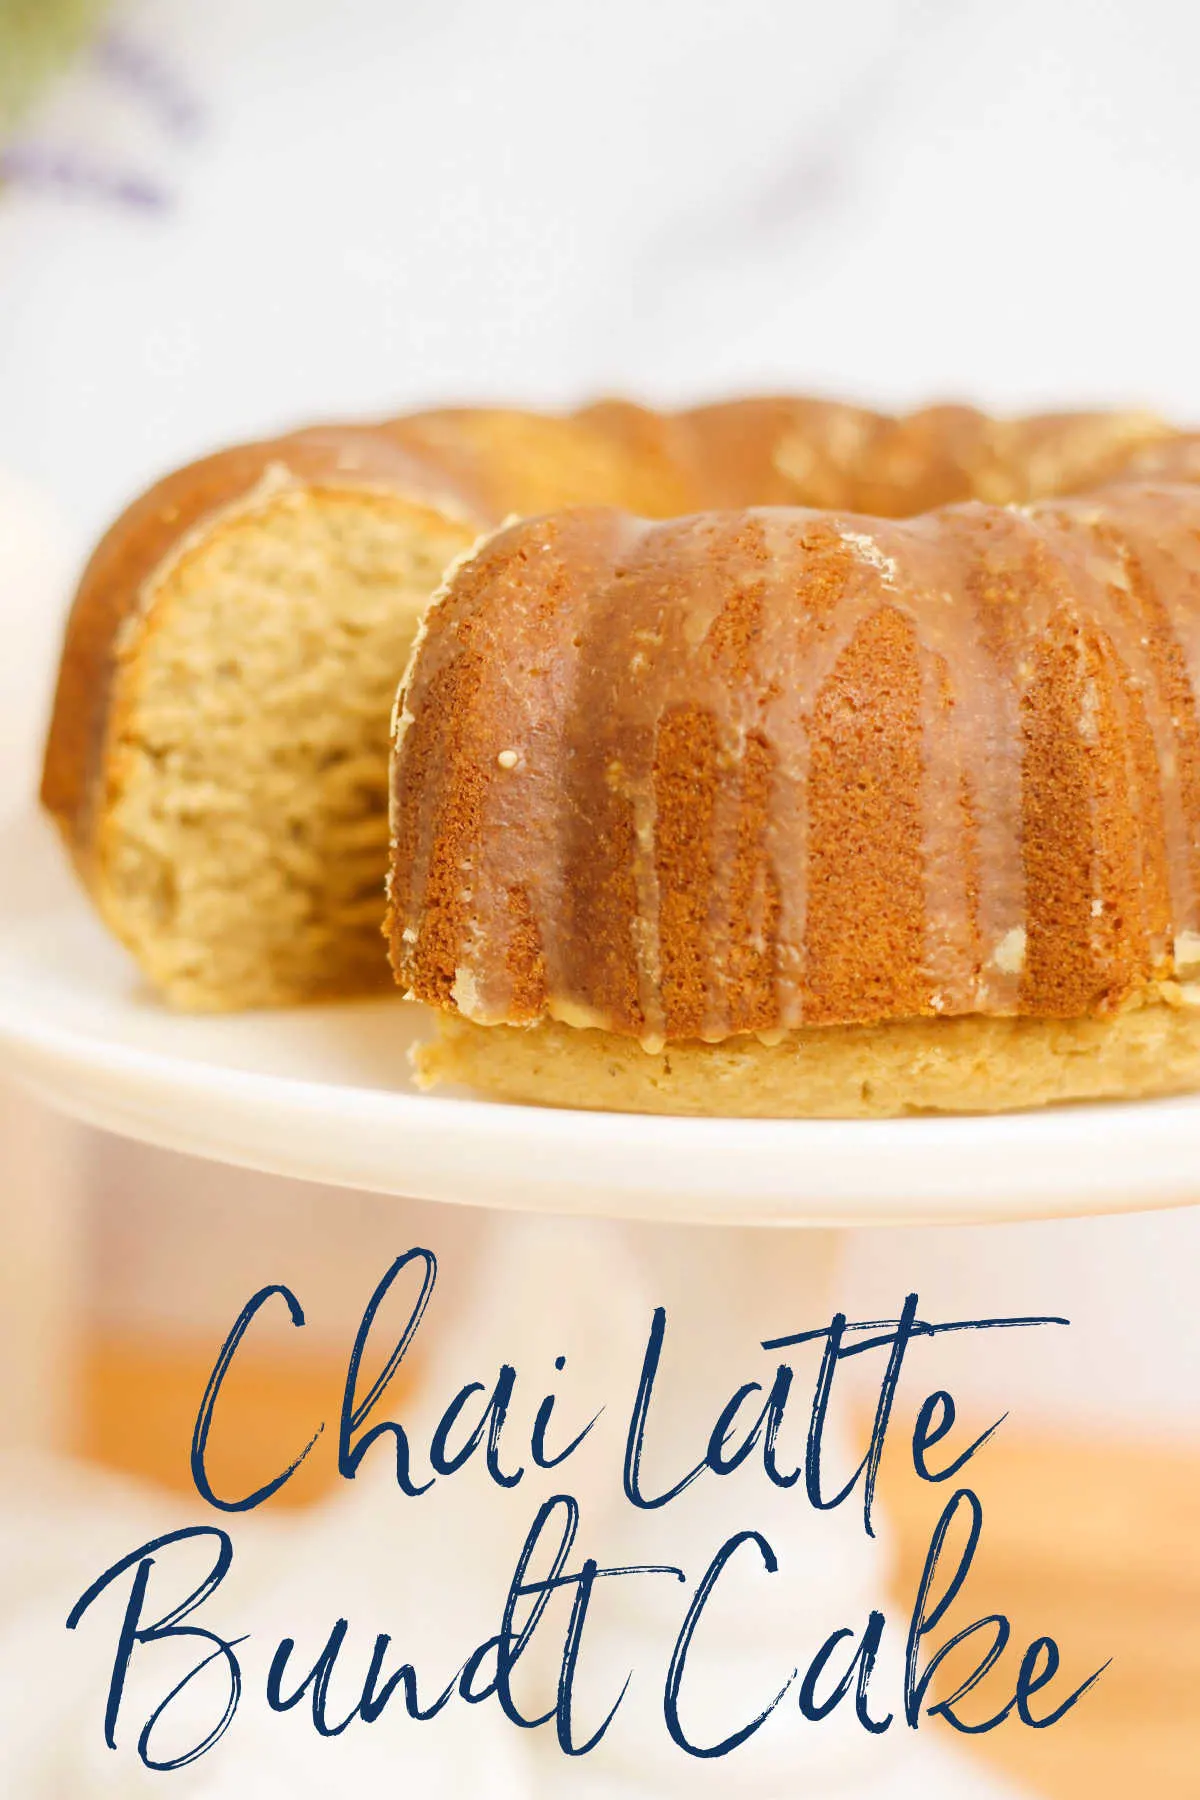 Whip up a homemade chai latte bundt cake for your next soiree. It has all of those spices you love in a buttery cake for a perfect grown up treat.